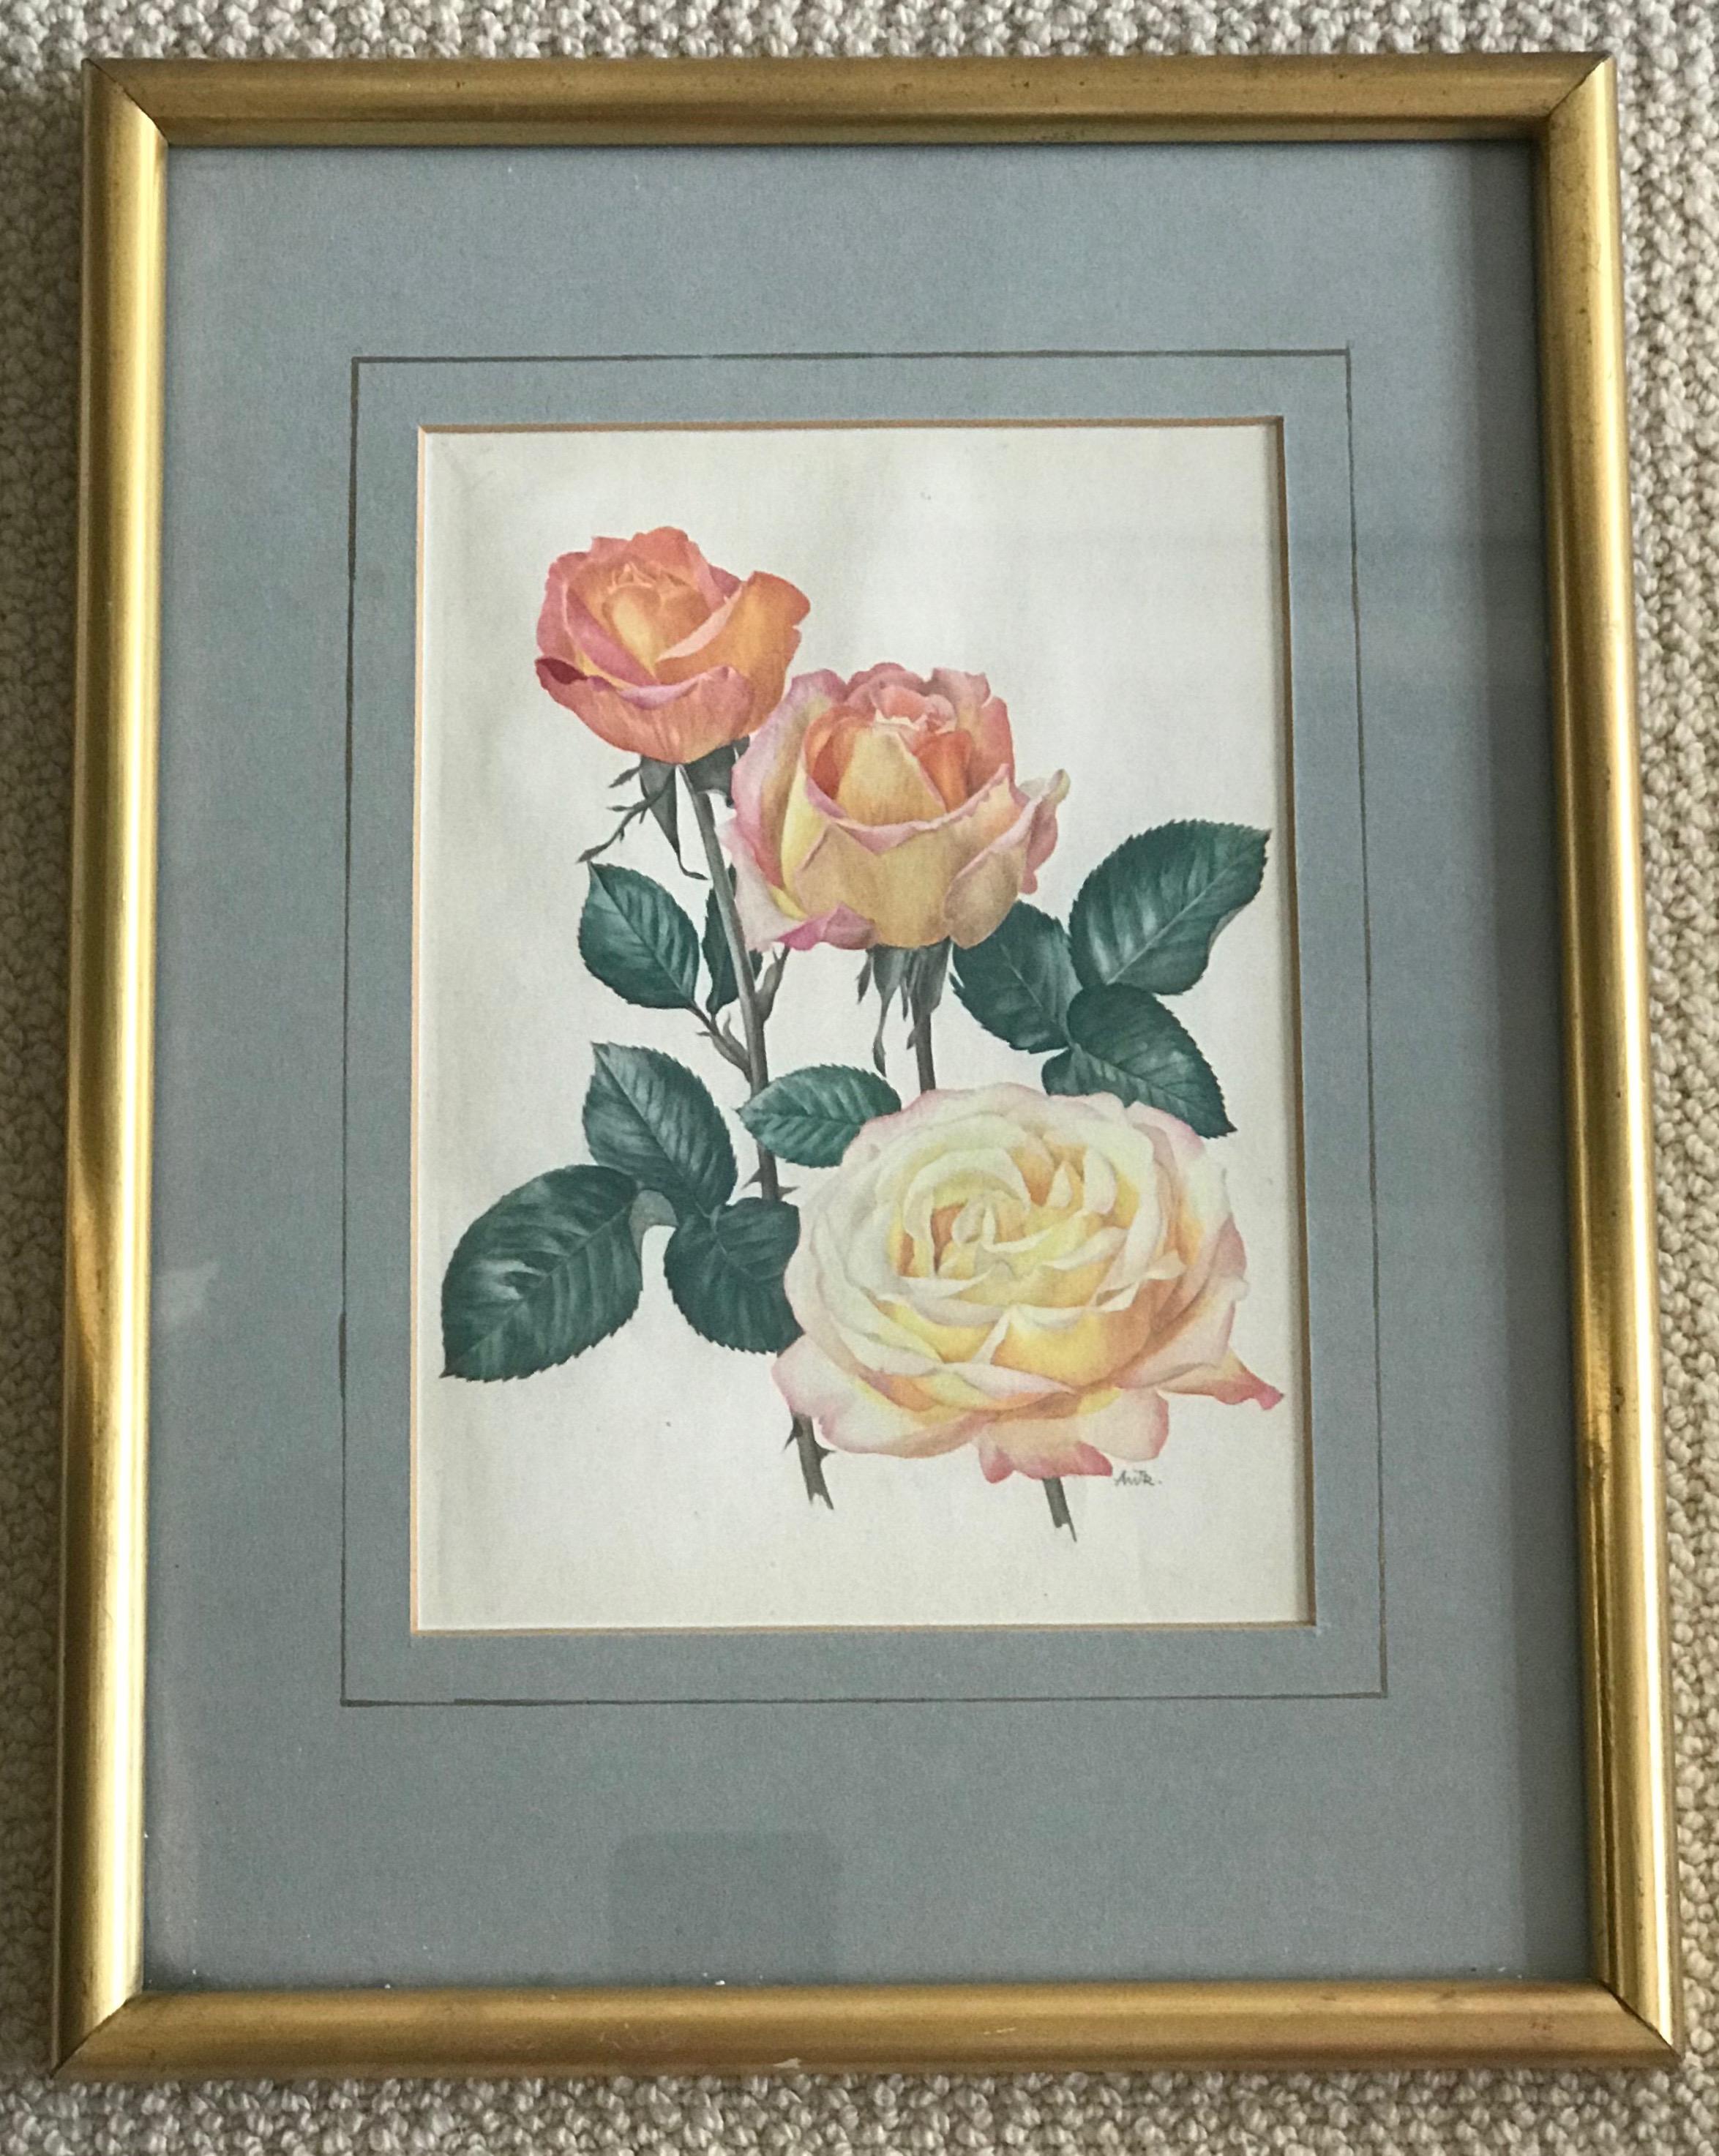 This pair of rose prints features golden frames. The frames contain additional information about the cultural background of the motives as can be seen in the photos.

Christian Dior (Hybrid Tea, Meilland 1958)
This was La Plus Belle Rose de